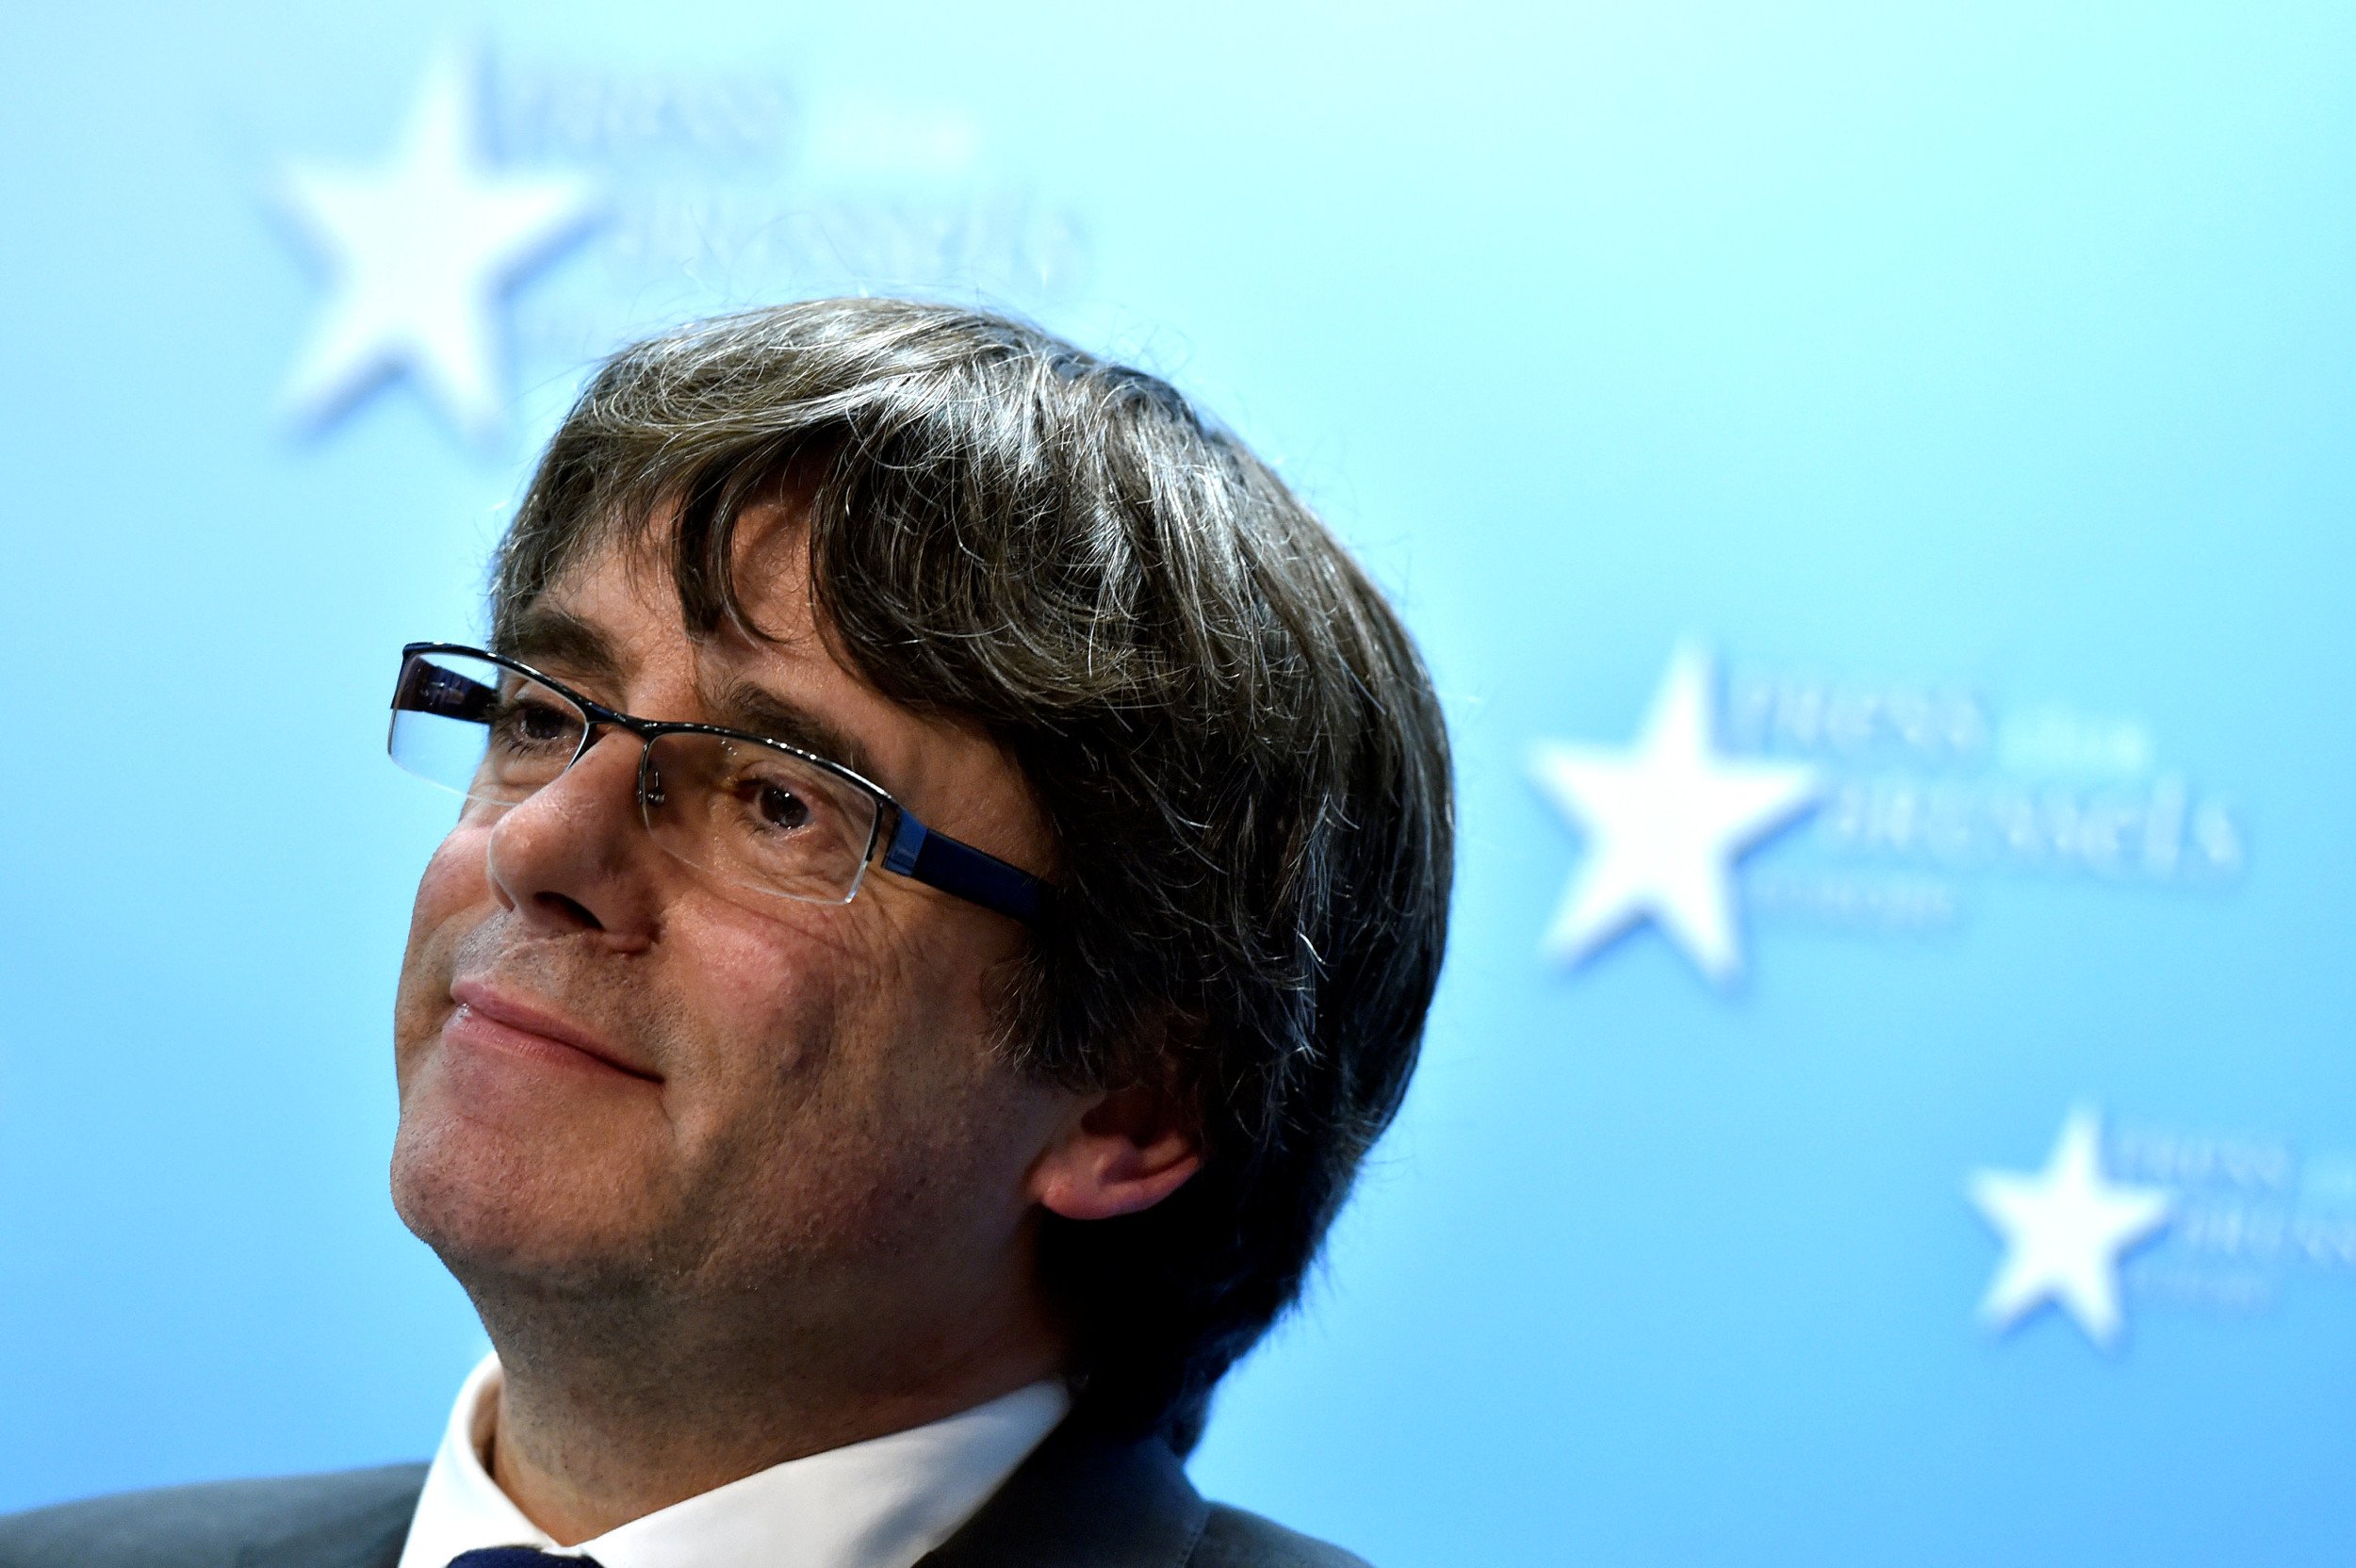 Puigdemont challenges Rajoy to respect election result, discounts escaping justice